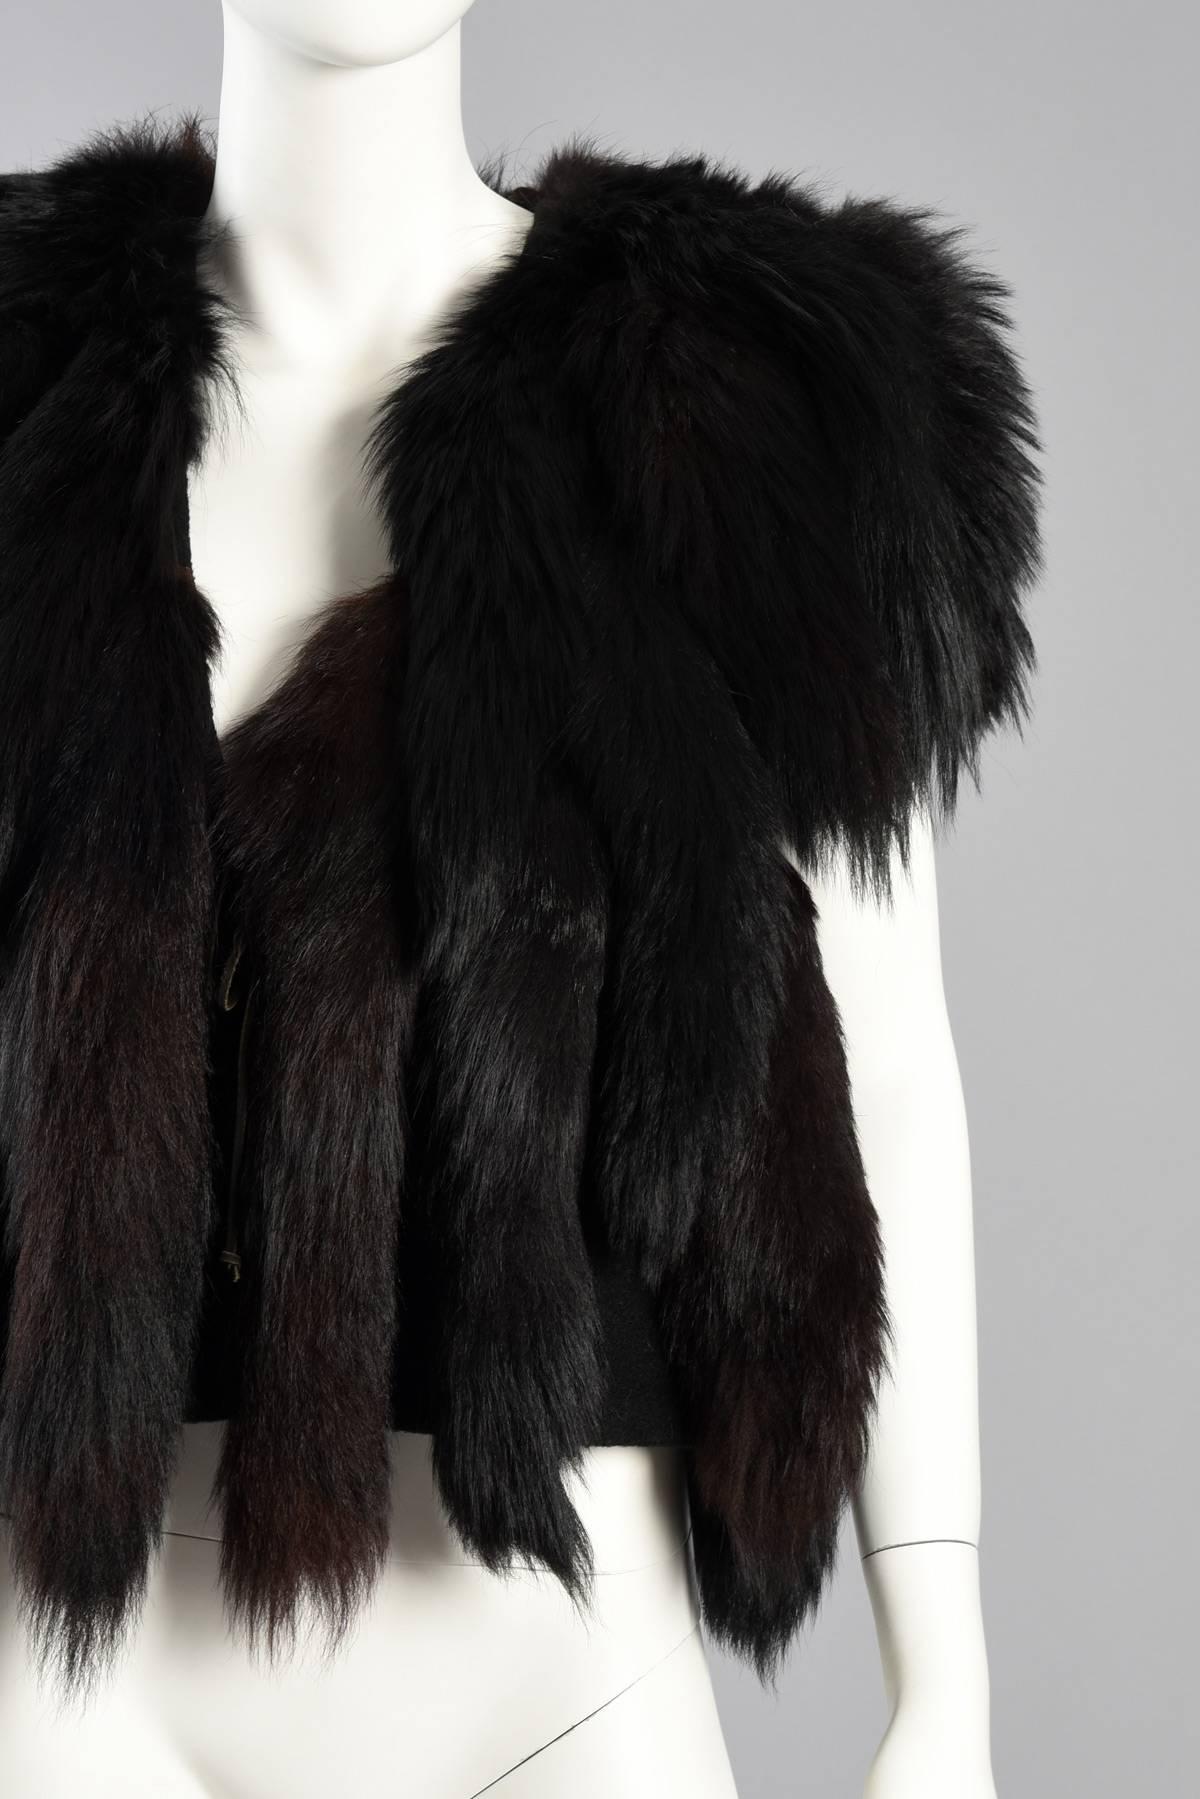 Don Kline Fox Tail Fur Fringed Gilet / Vest In Excellent Condition For Sale In Yucca Valley, CA